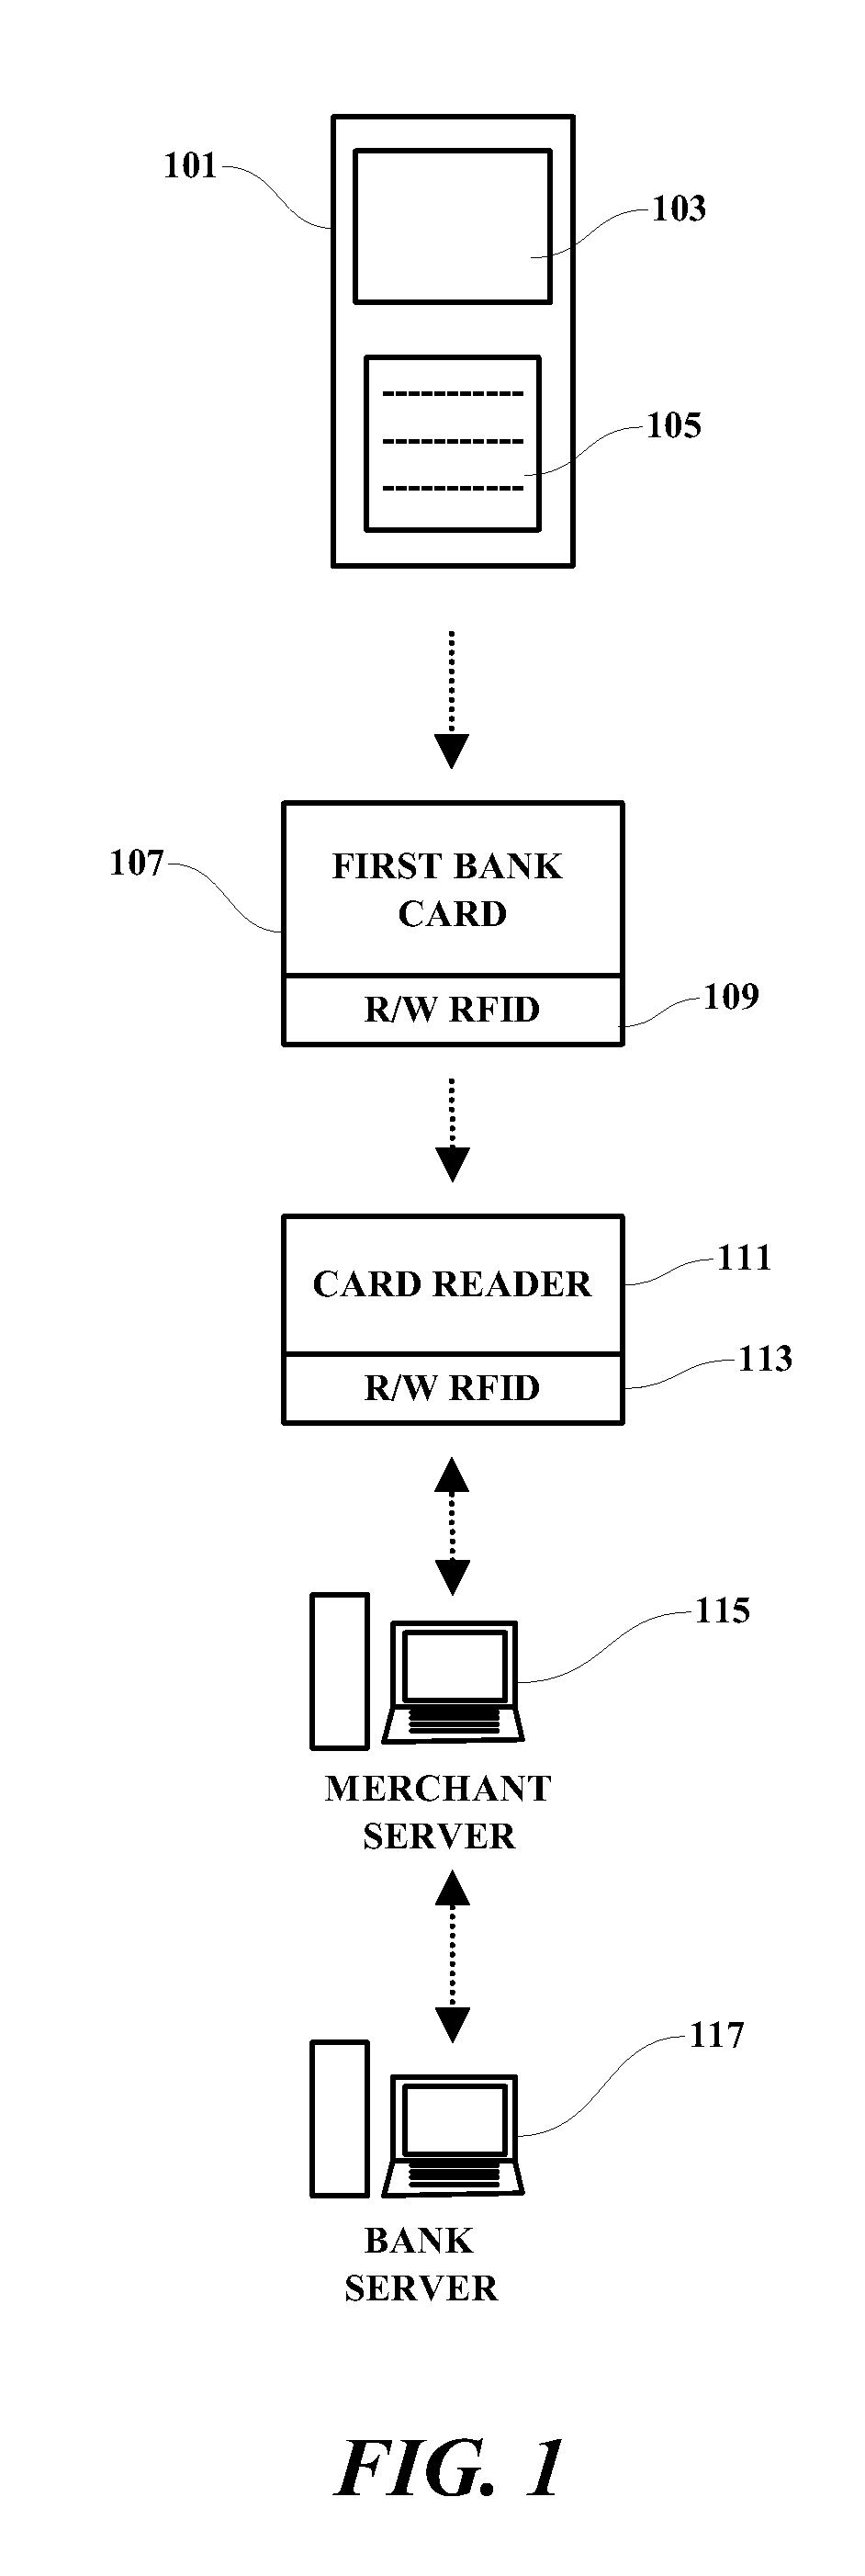 Payment card processing system